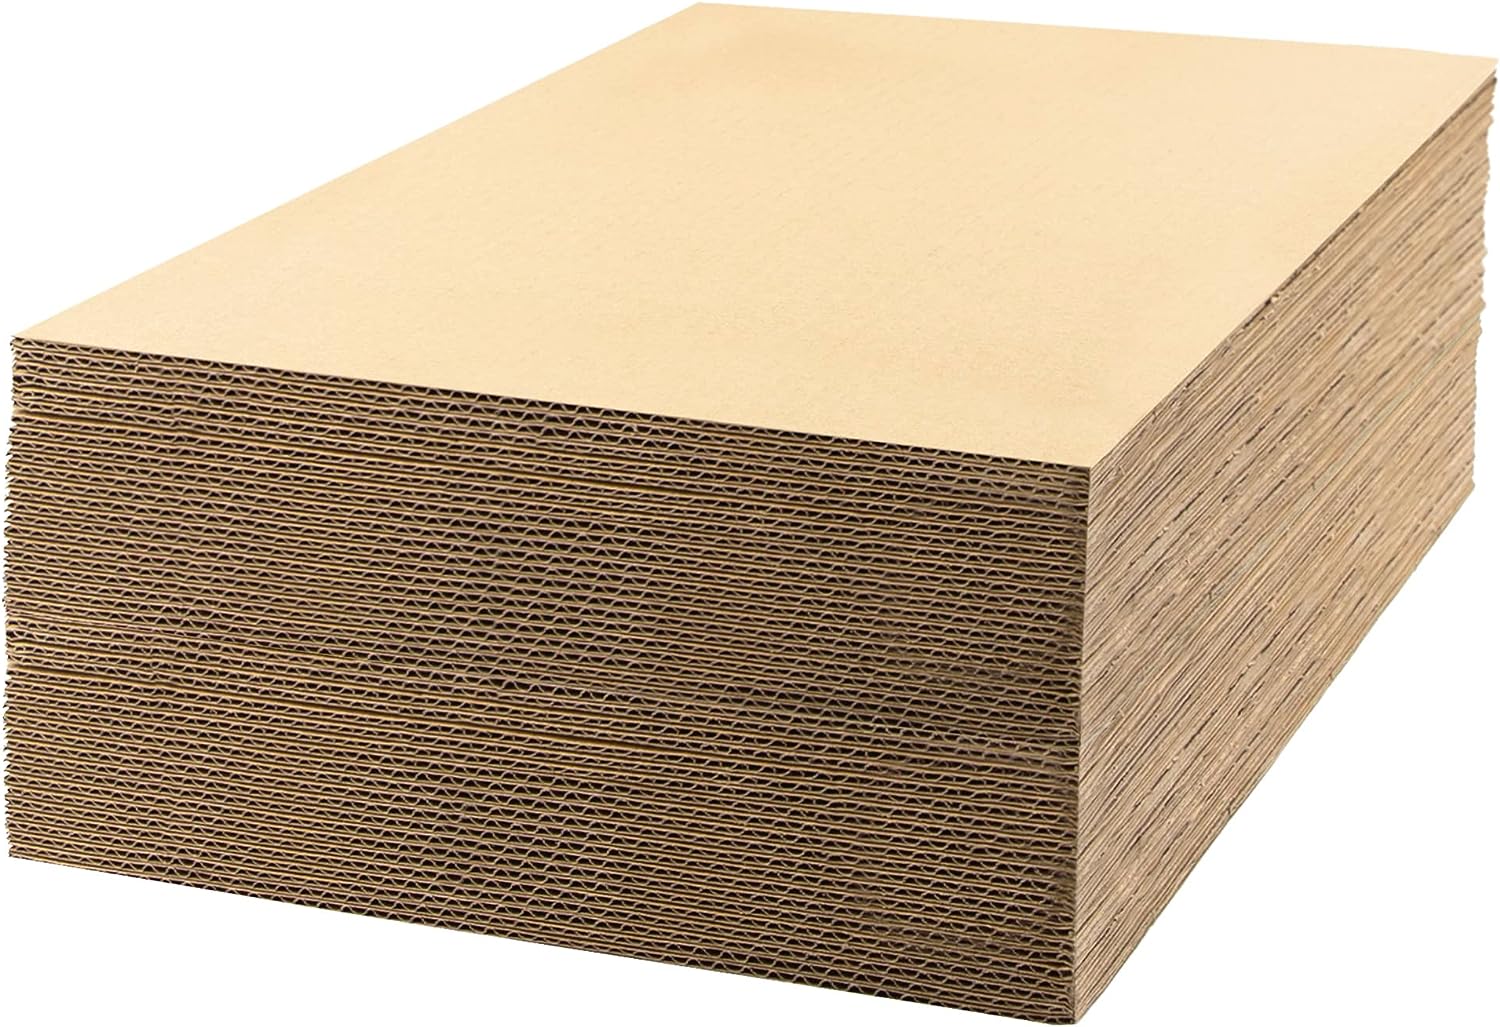 24 Pack Thick Corrugated Cardboard Sheets, Bulk Flat 12x12 Square Inserts  for Packing, Mailing, DIY Crafts